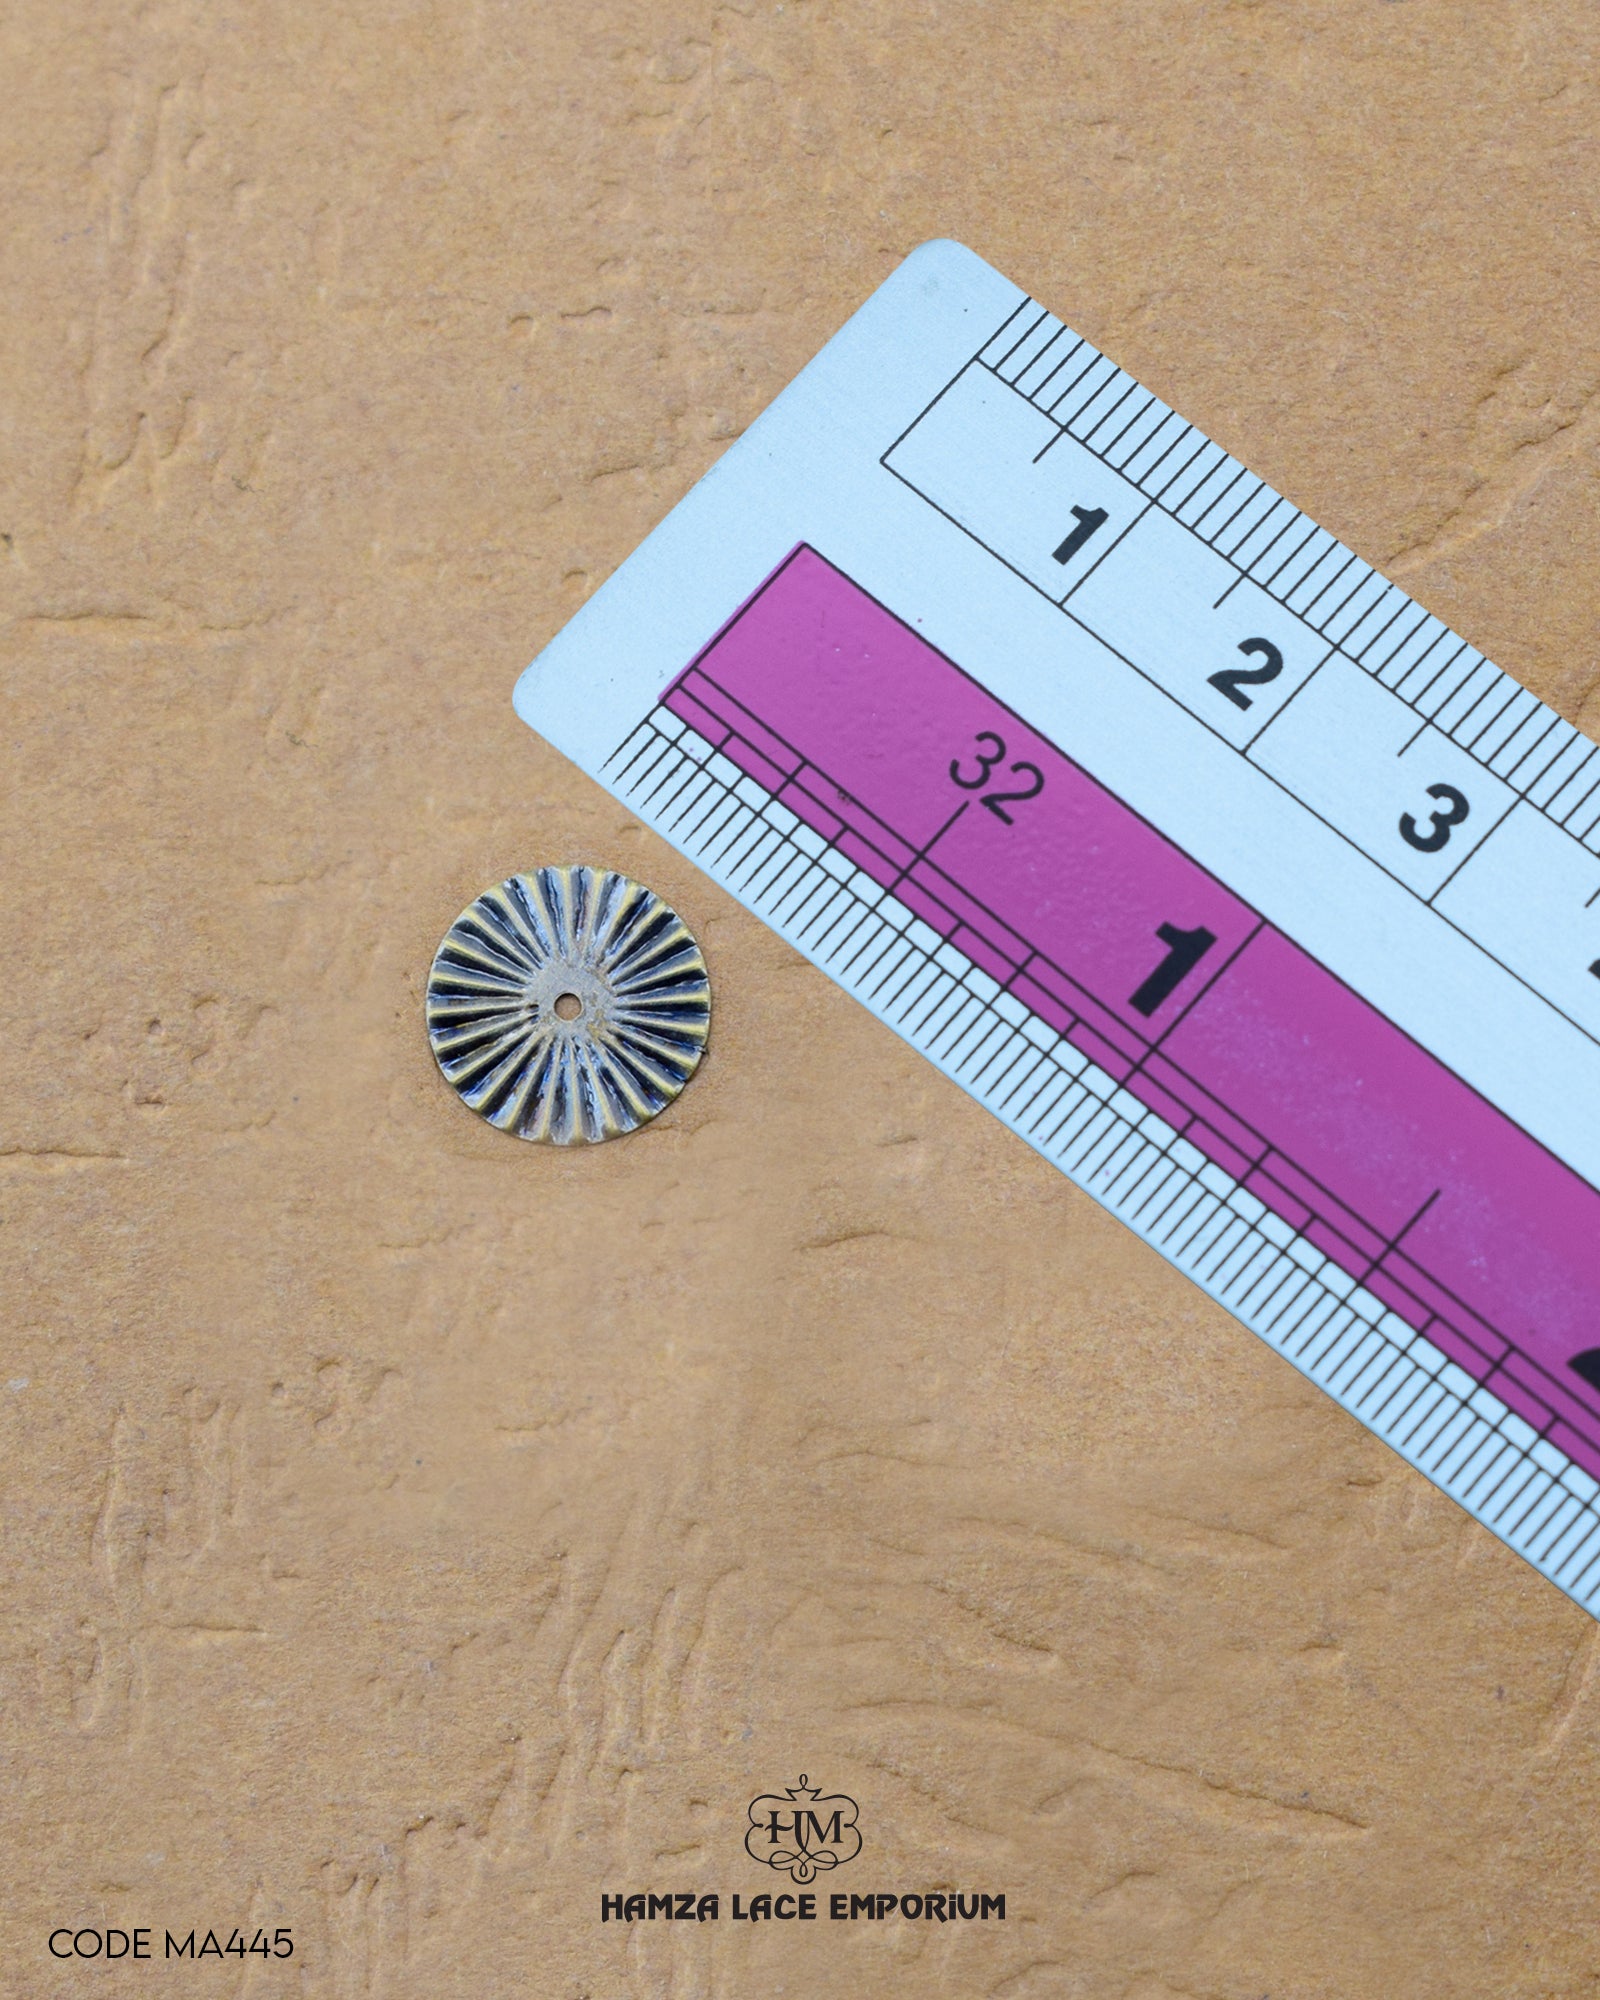 The size of the Beautifully designed 'Round Shape Button MA445' is measured by using a ruler